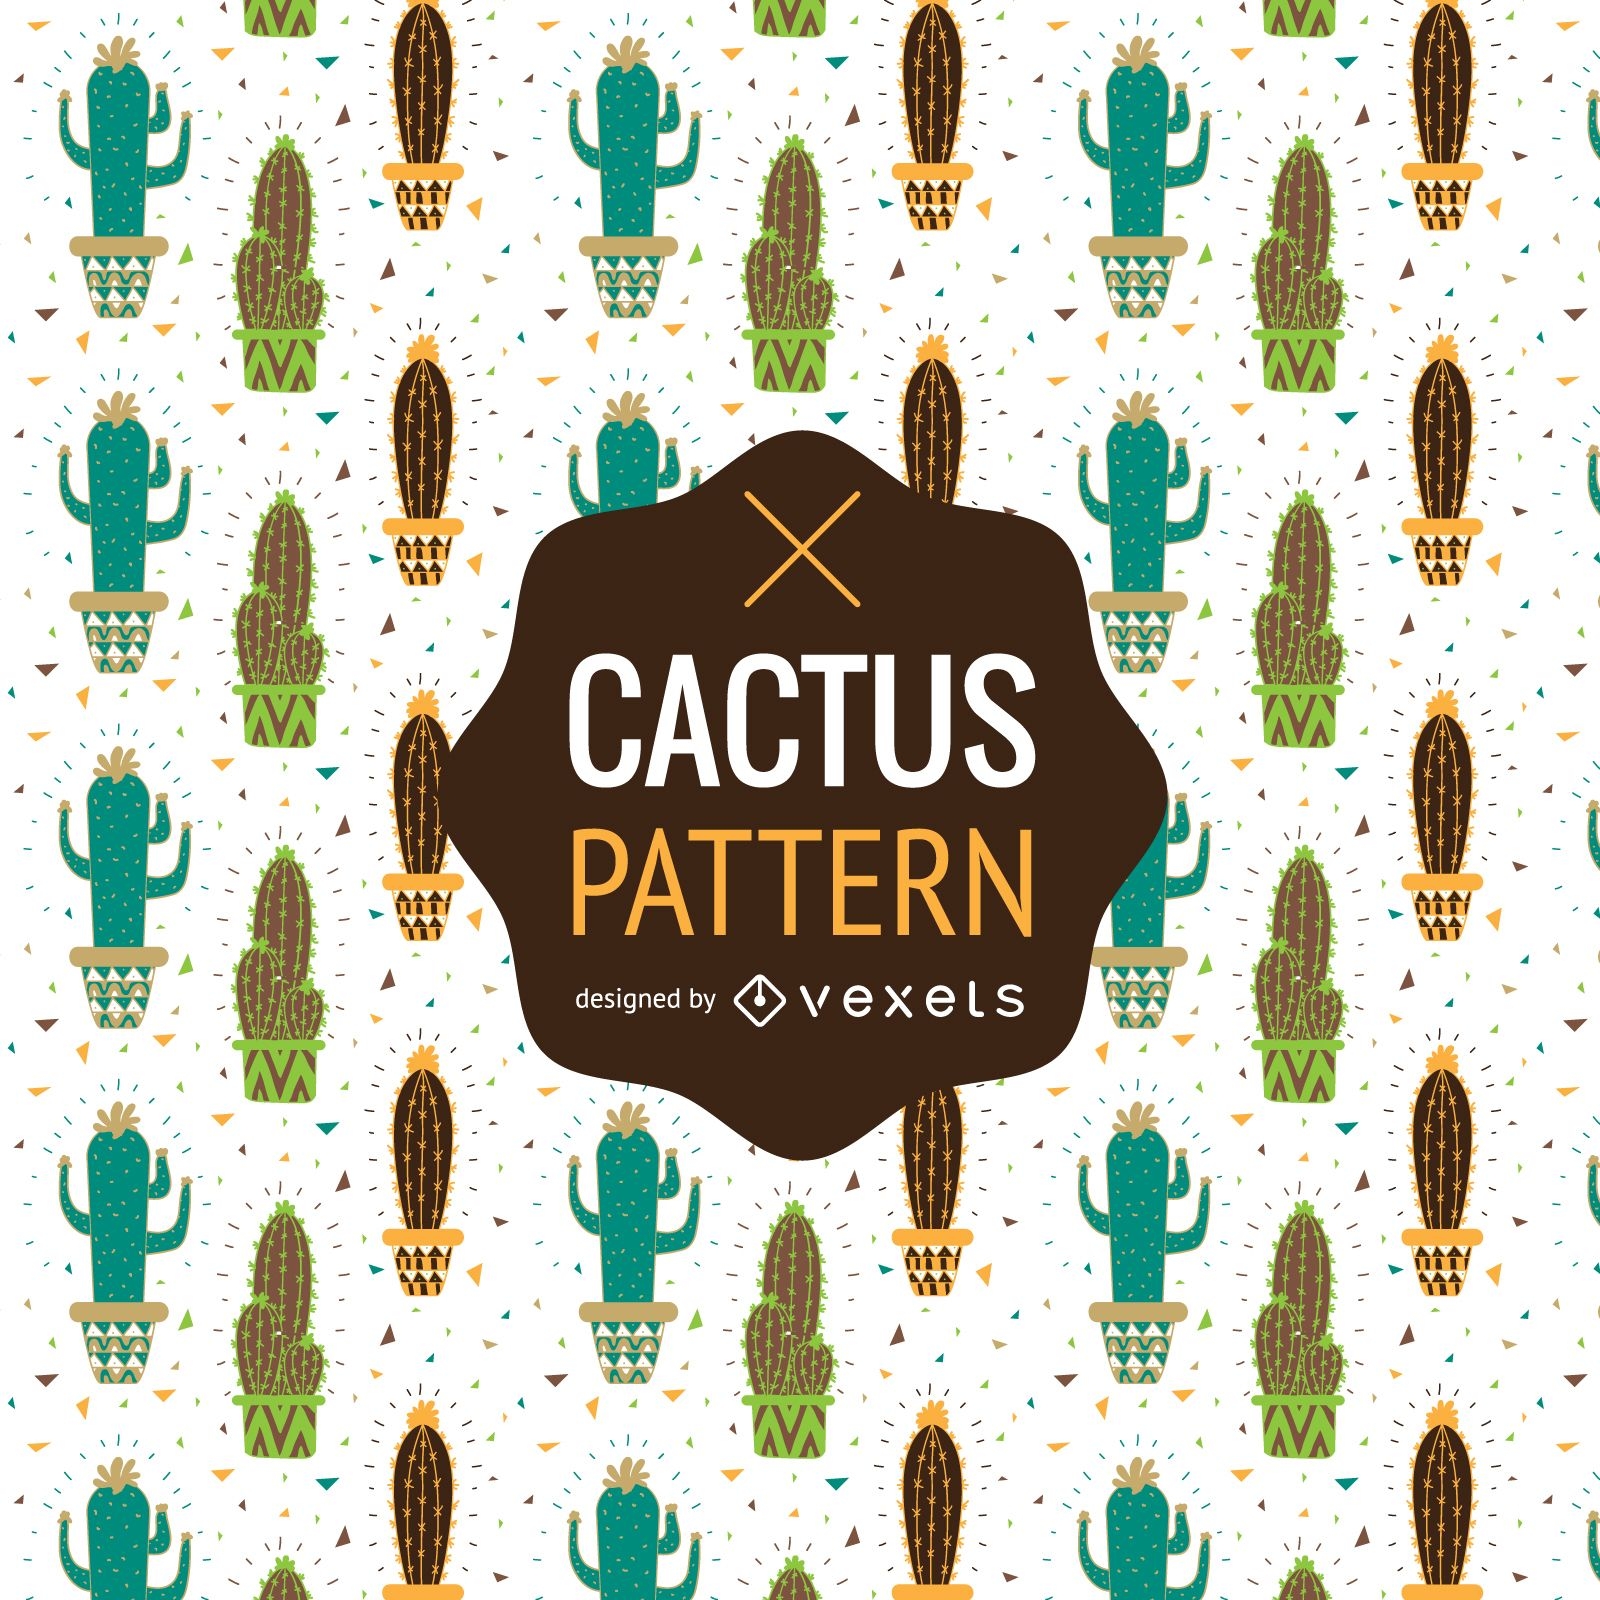 Cactus pattern or background